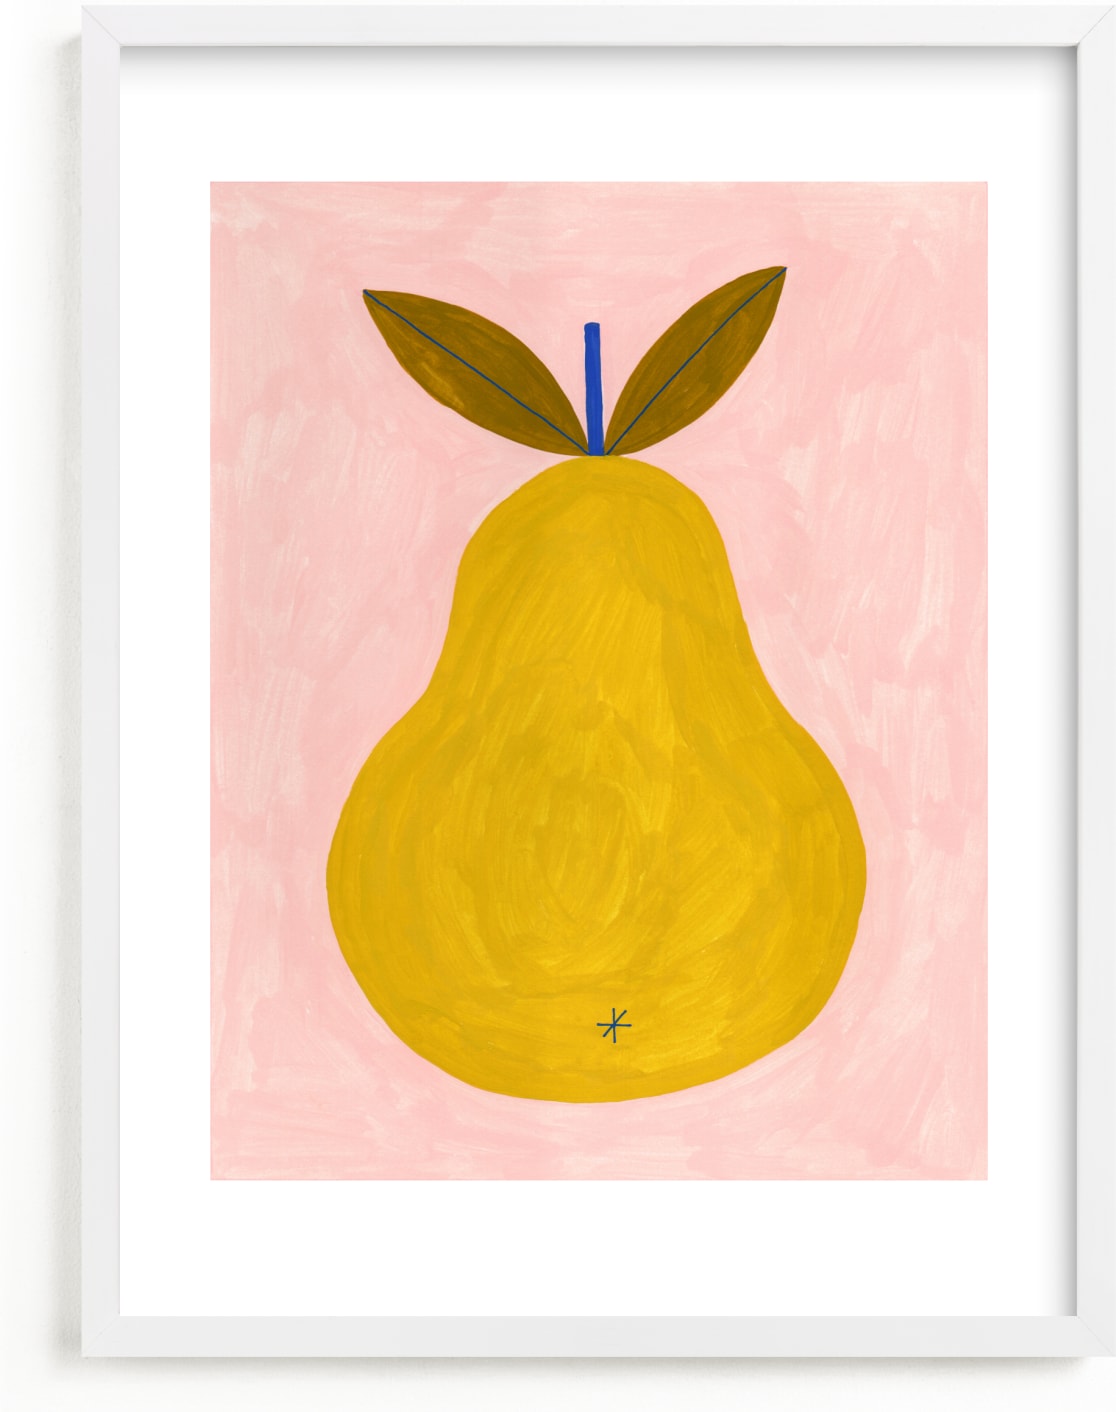 This is a yellow kids wall art by Ana Toro called Barlett Pear.